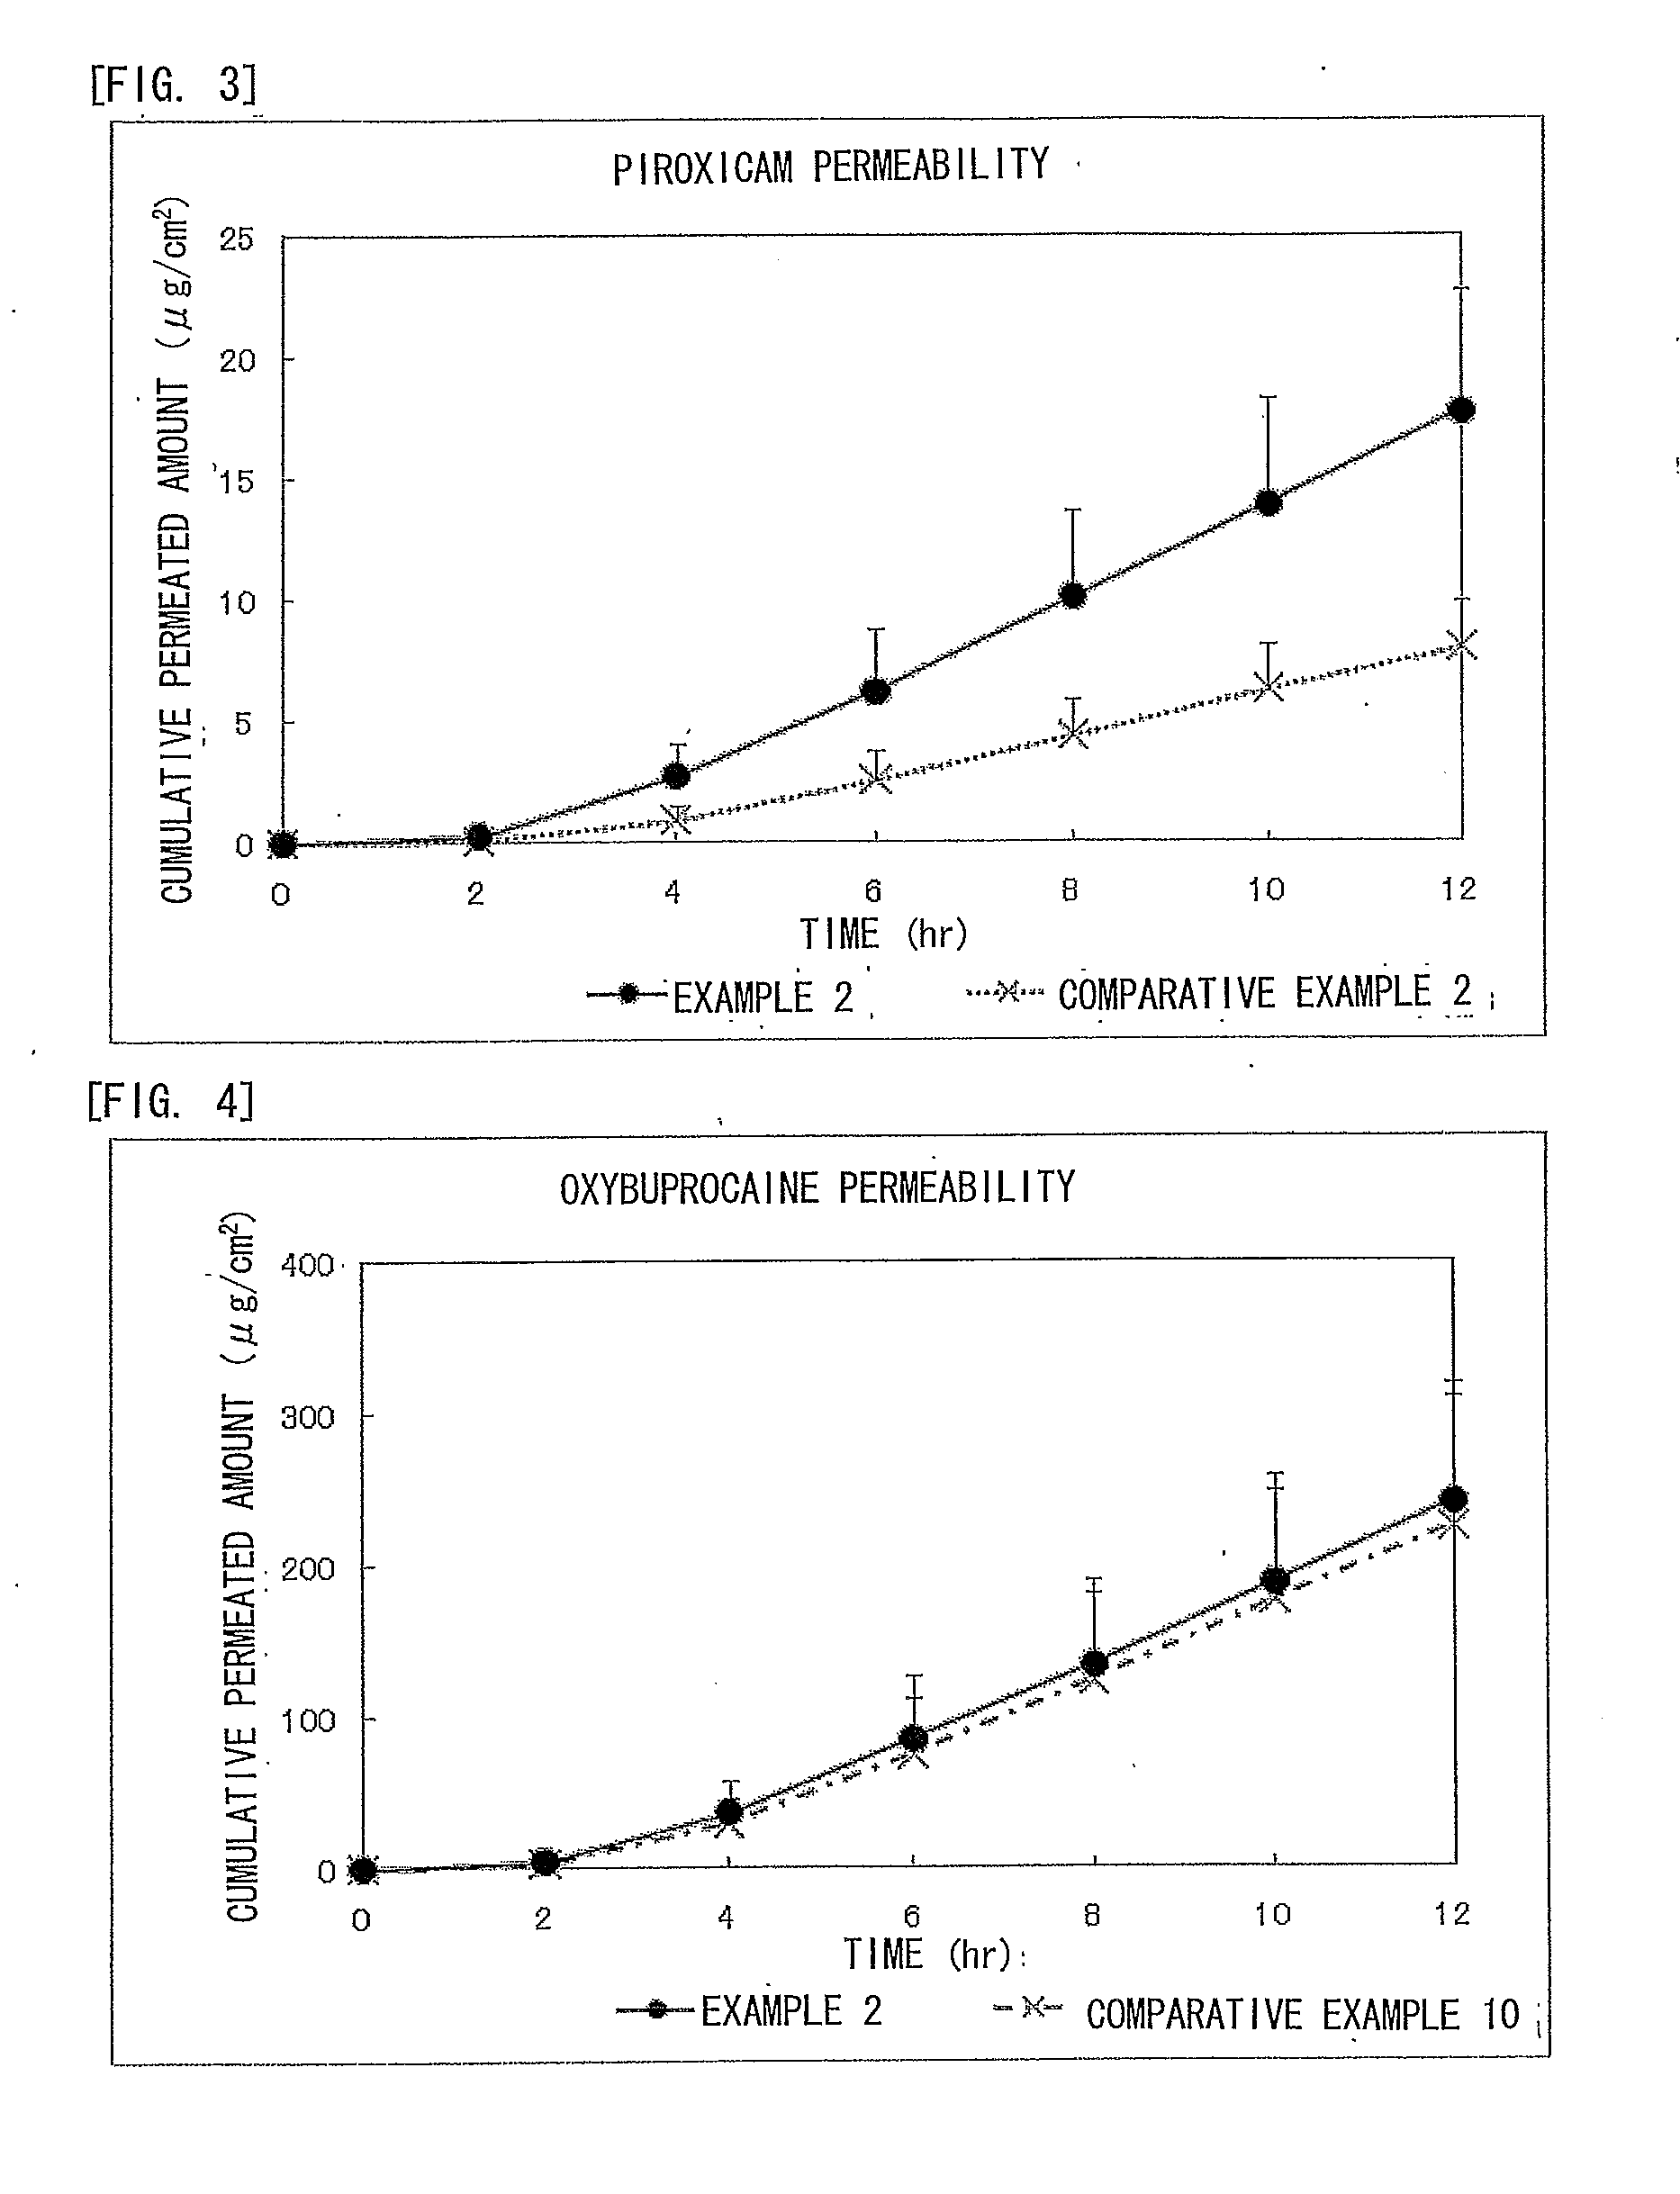 Piroxicam-Containing Transdermally Absorbable Preparation